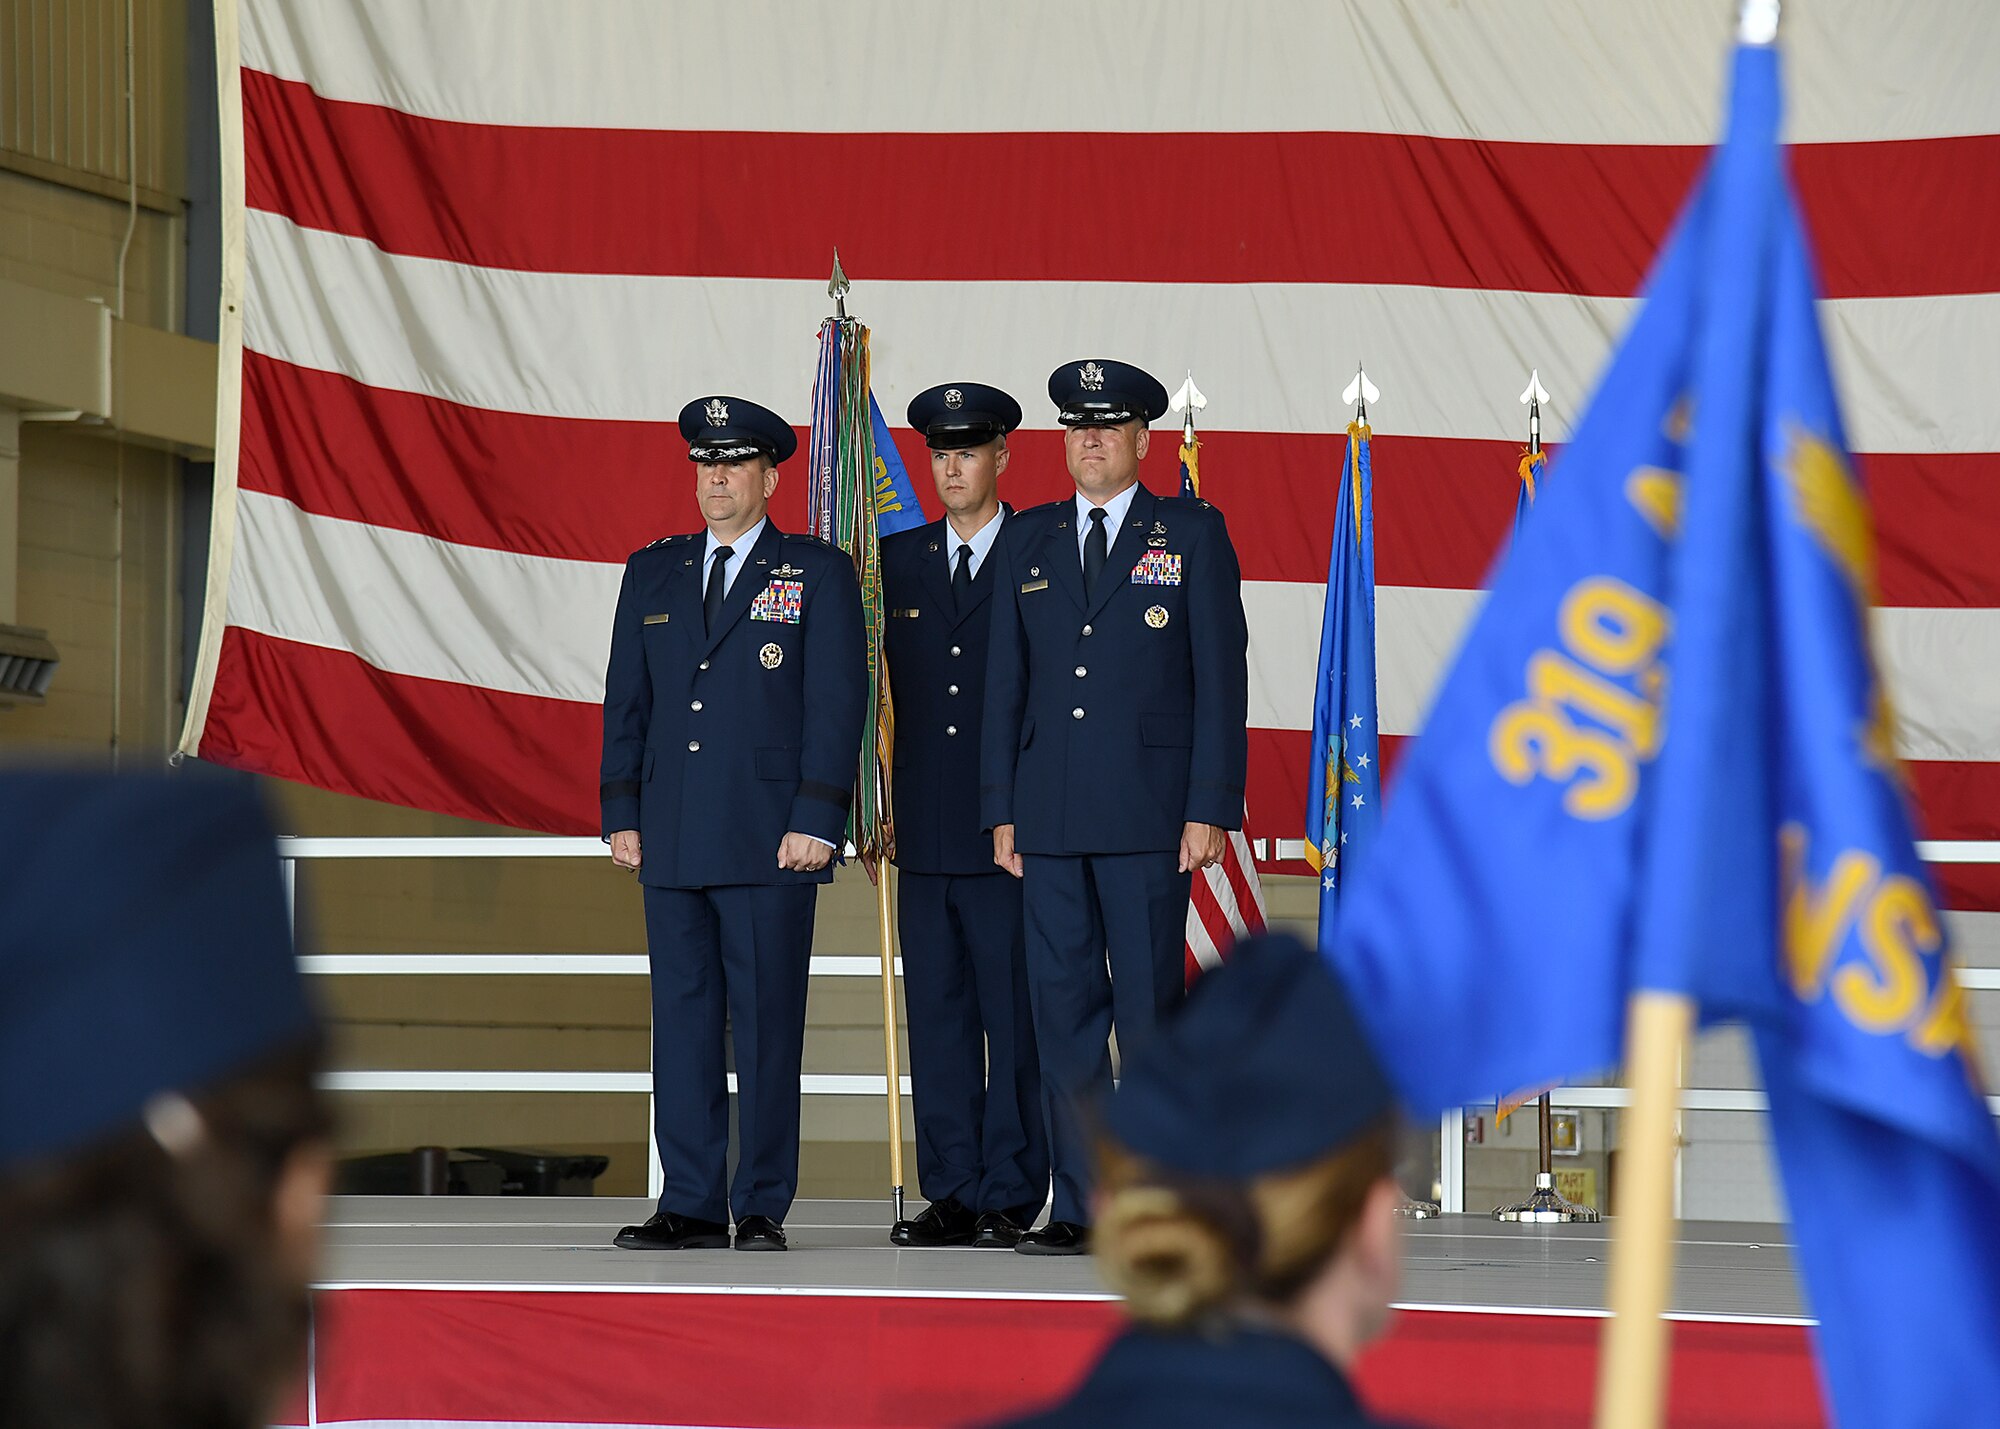 Maj. Gen. Christopher Bence, U.S. Air Force Expeditionary Center commander, left, and Col. Benjamin Spencer, 319th Air Base Wing commander, right, stand in preparation to pass the 319 ABW guidon. Chief Master Sgt. Brian Thomas, 319 ABW command chief, center, provided the guidon for the symbolic exchange during the wing Assumption of Command ceremony June 6, 2017, on Grand Forks Air Force Base, N.D. Spencer and Thomas bring a two-year working relationship to the wing as they take over leading the Warriors of the North. (U.S. Air Force photo by Senior Airman Ryan Sparks)